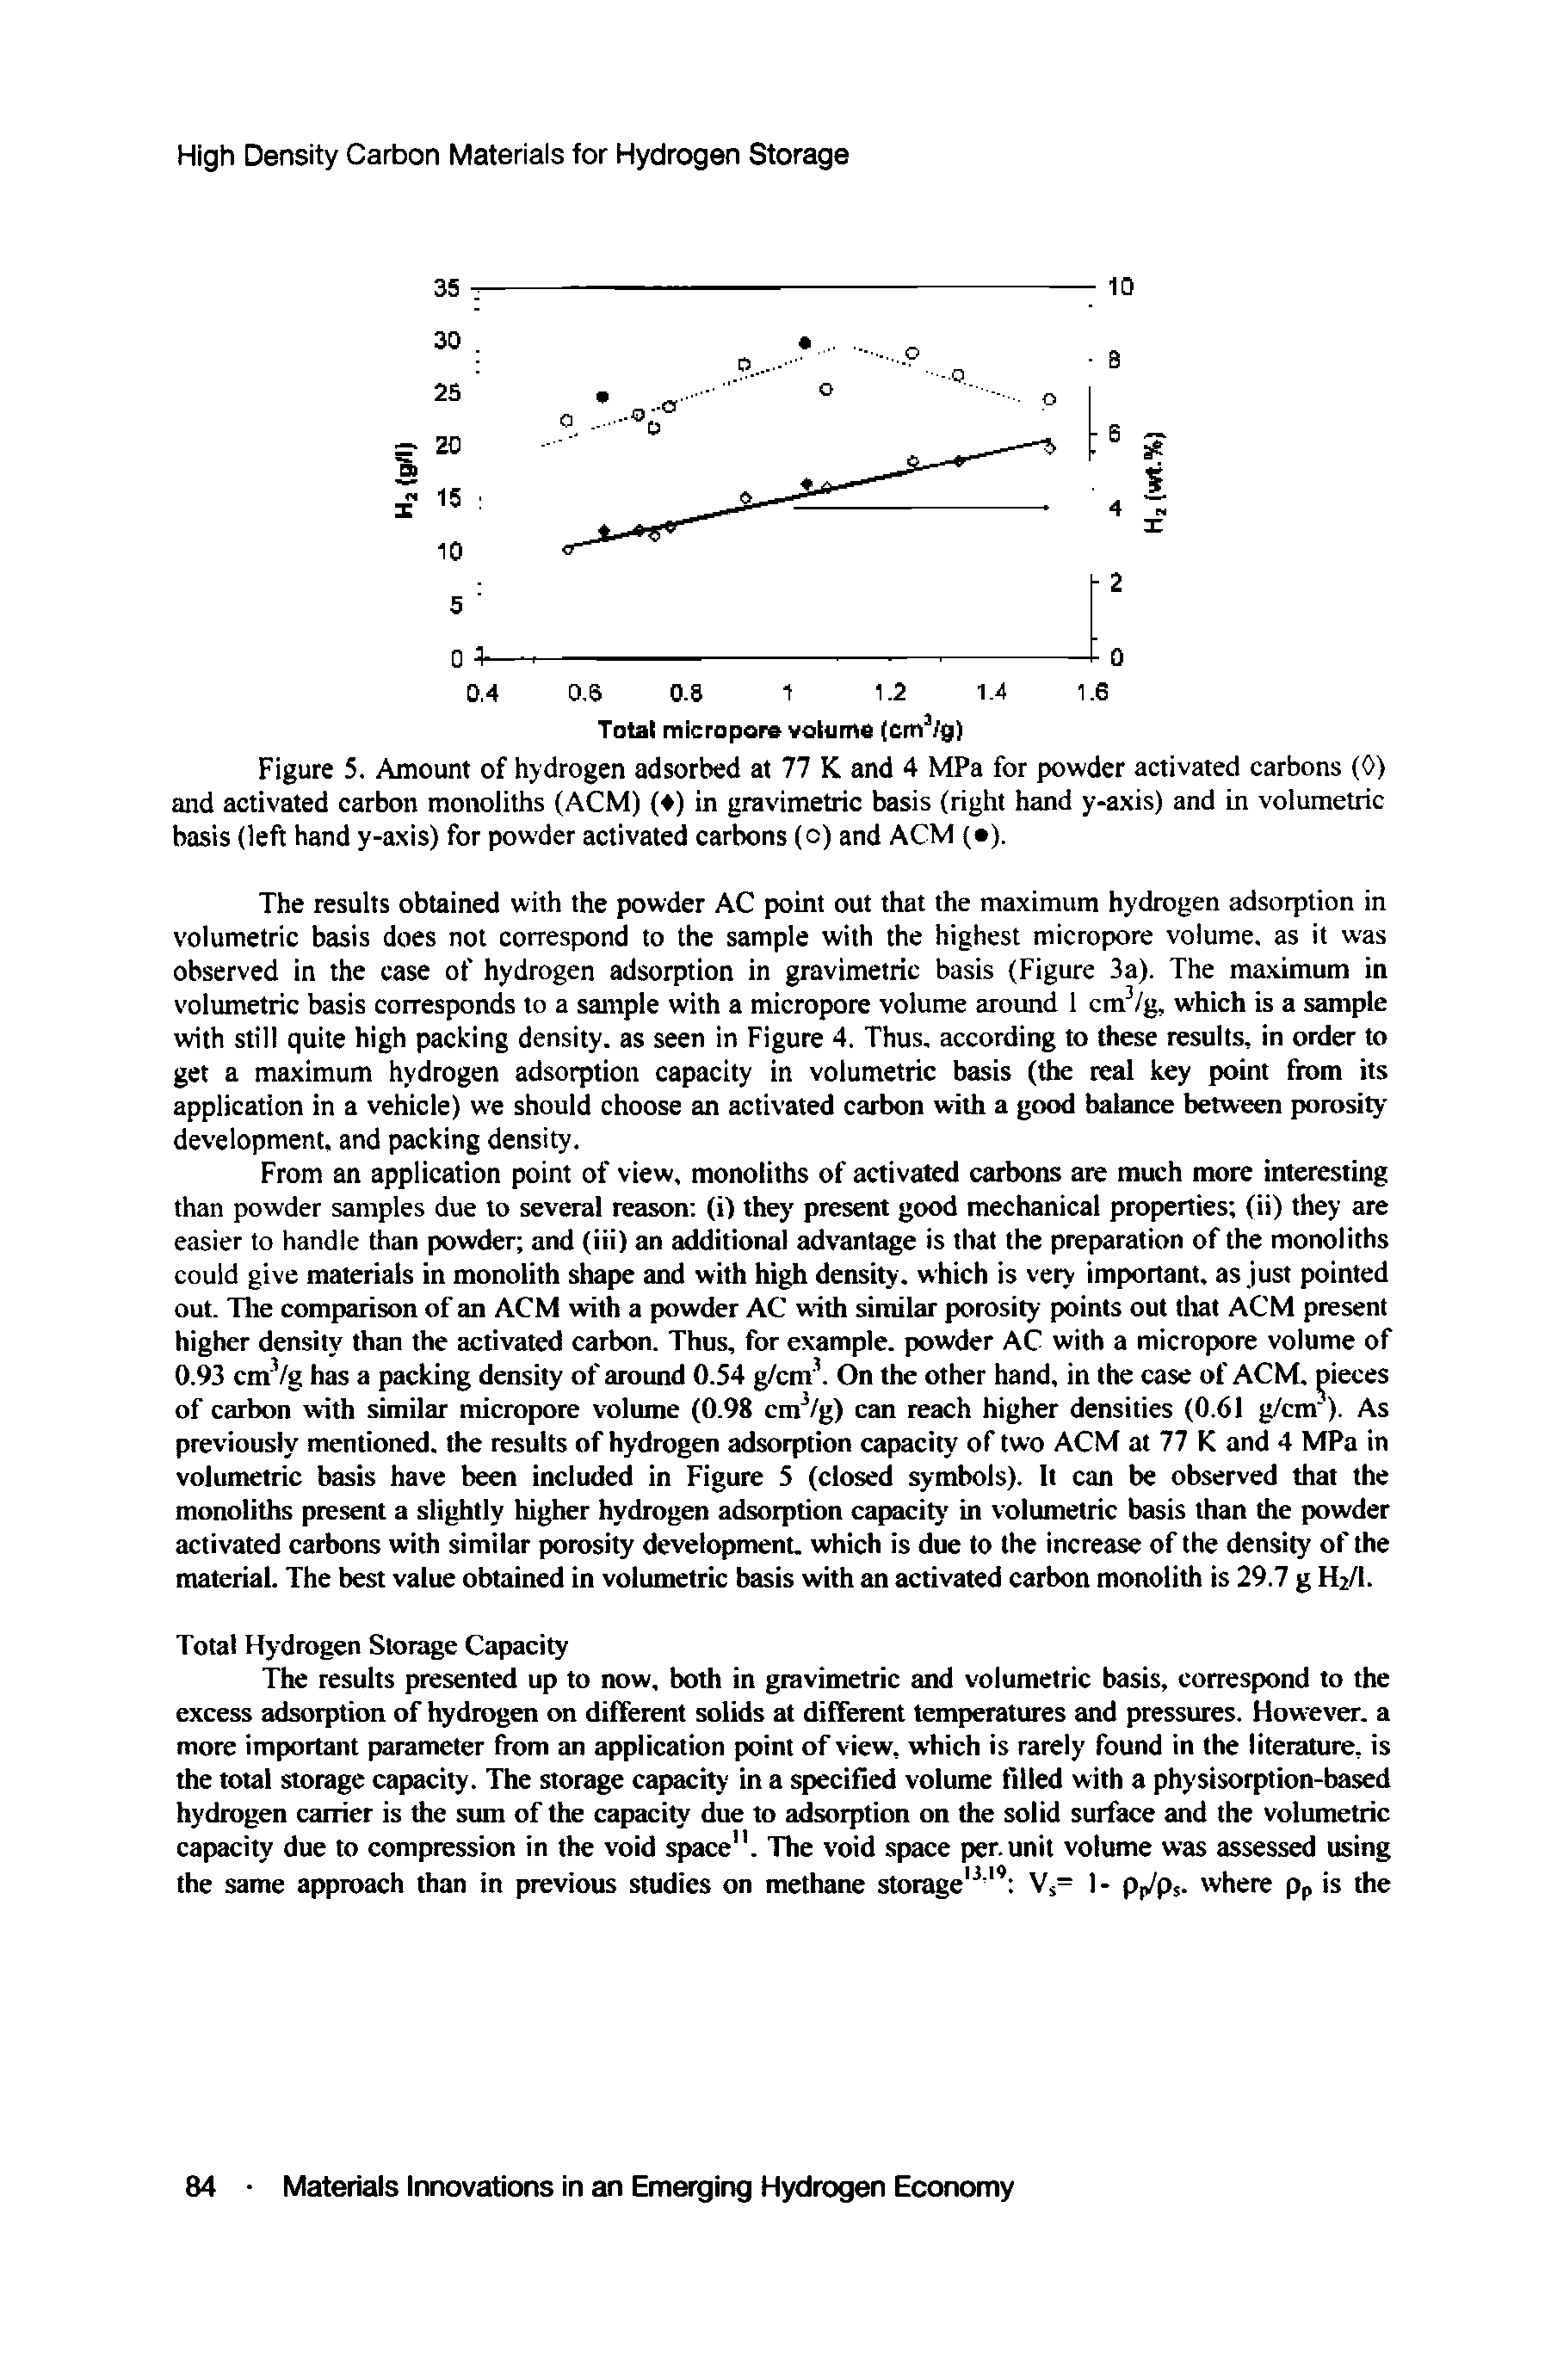 Figure 5. Amount of hydrogen adsorbed at 77 K and 4 MPa for powder activated carbons (0) and activated carbon monoliths (ACM) ( ) in gravimetric basis (right hand y-axis) and in volumetric basis (left hand y-axis) for powder activated carbons (c) and ACM ( ).